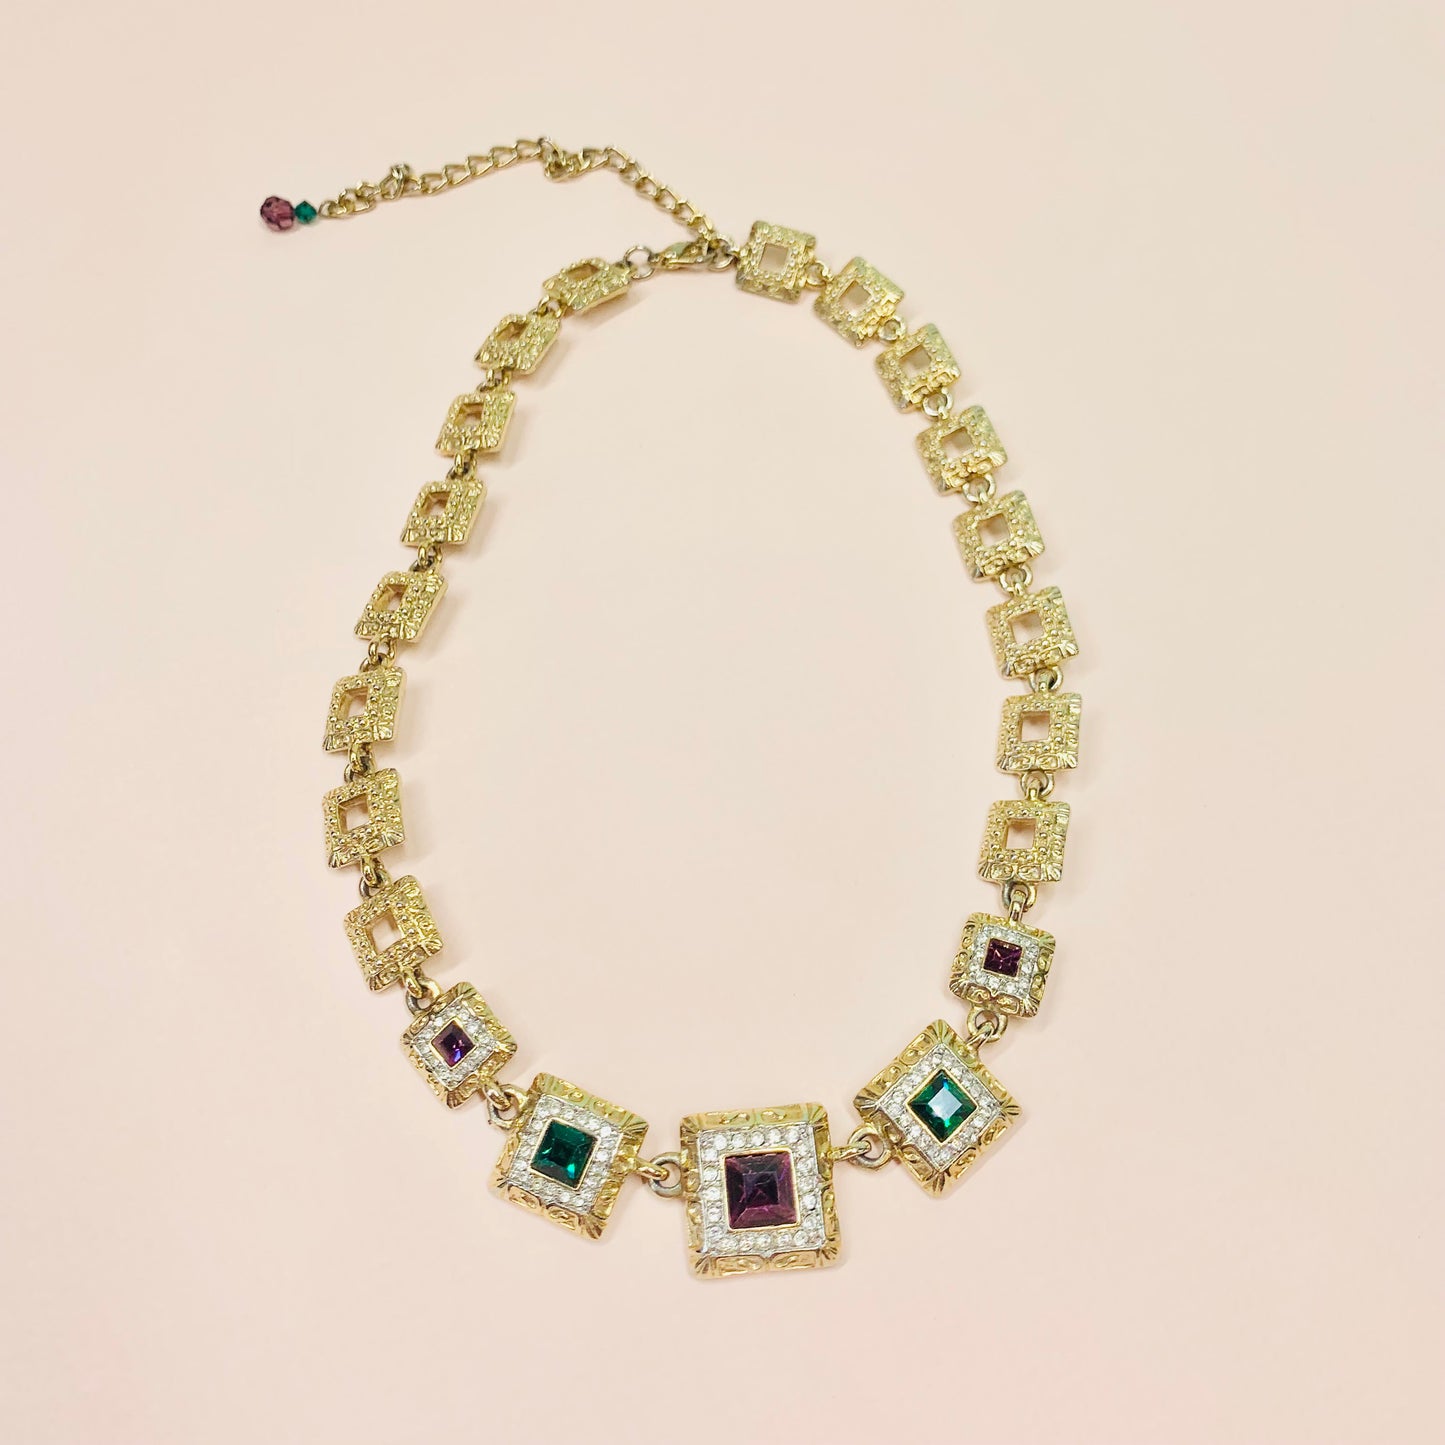 Extremely rare 1950s gold plated colour gem necklace in the tutti fruitti style